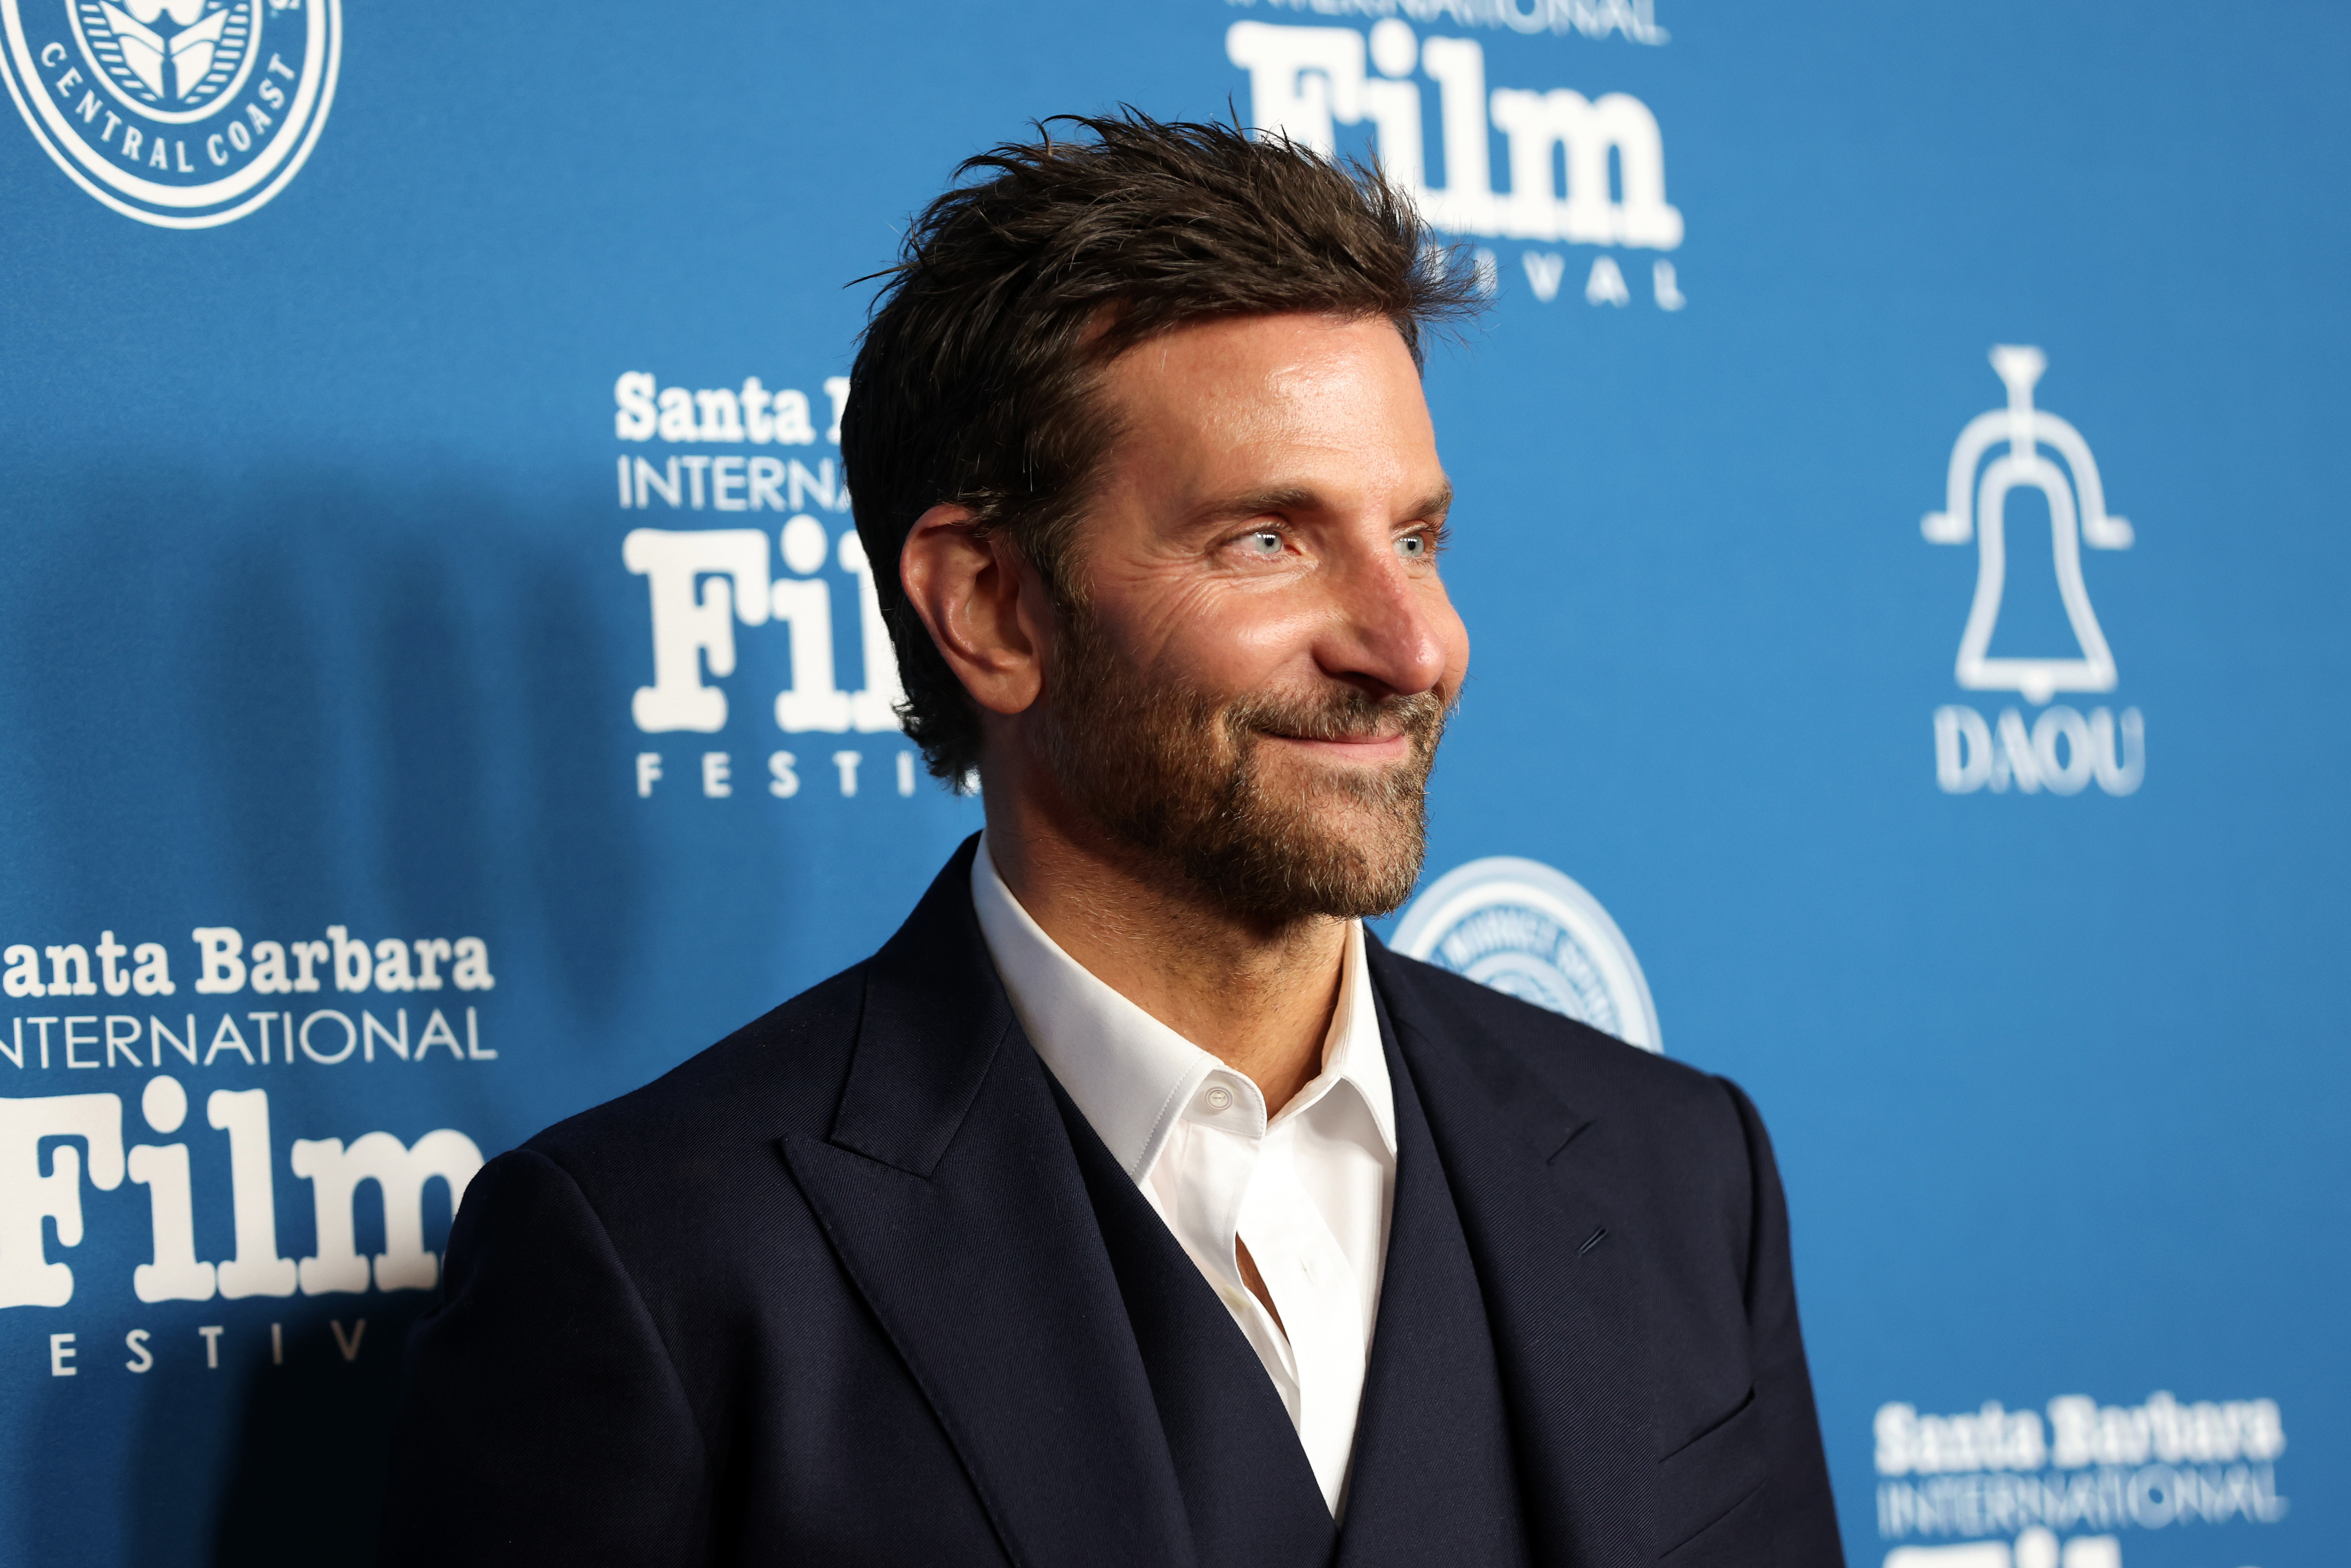 Bradley in suit smiling at an event, style evident, on a branded background